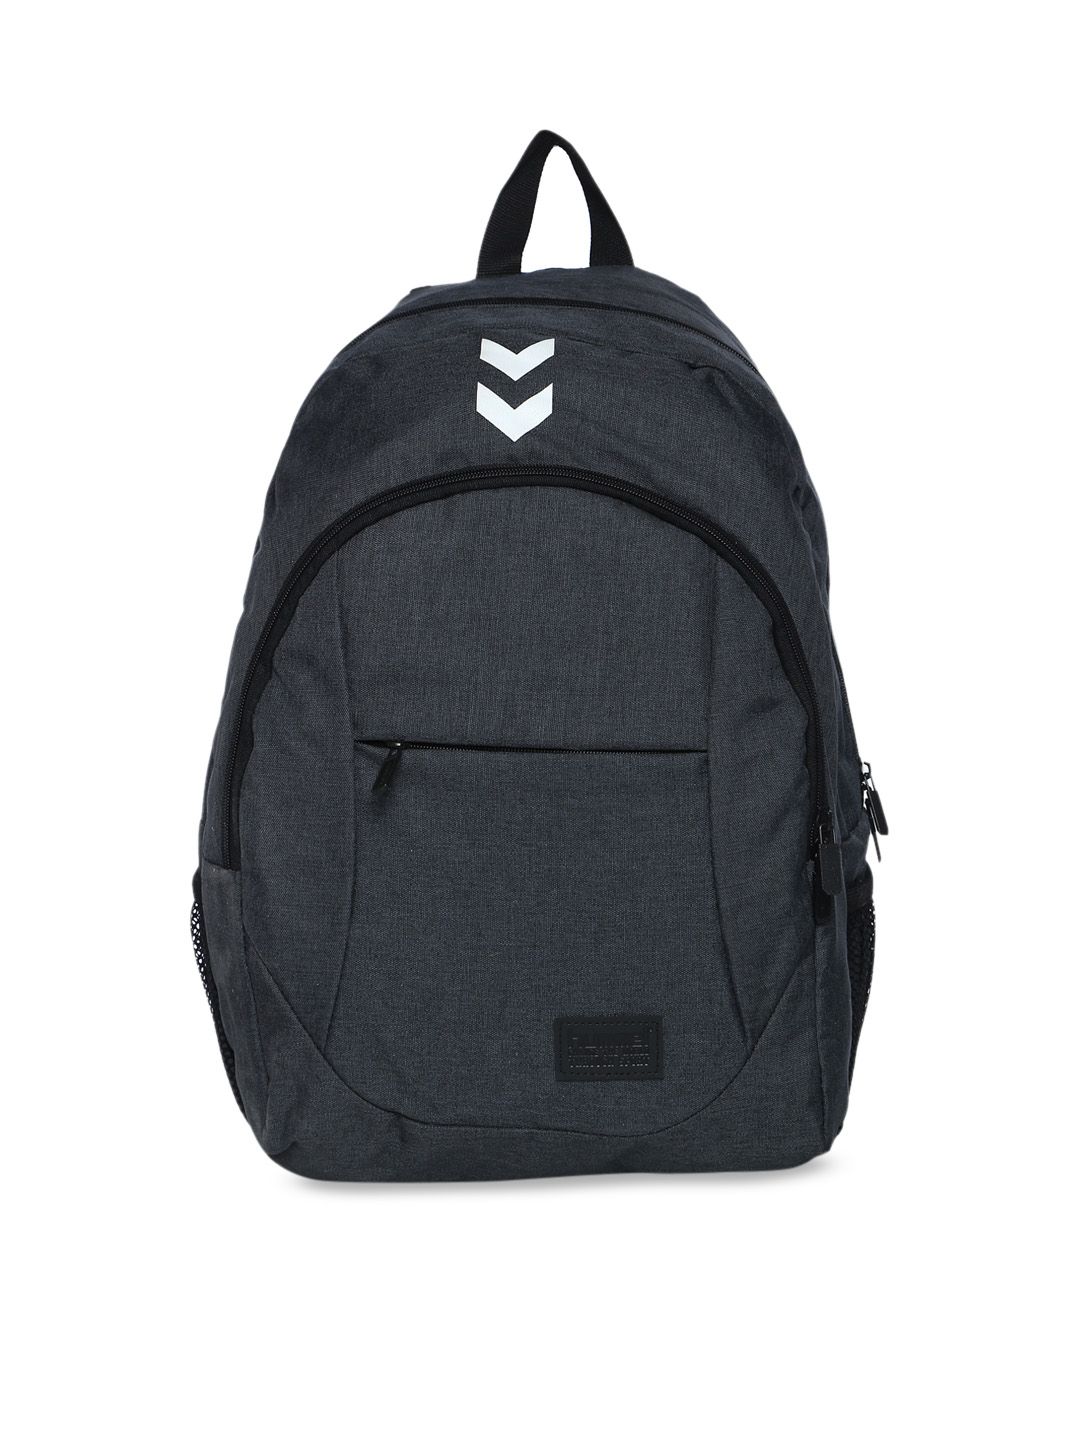 hummel Unisex Black Solid Backpack Price in India